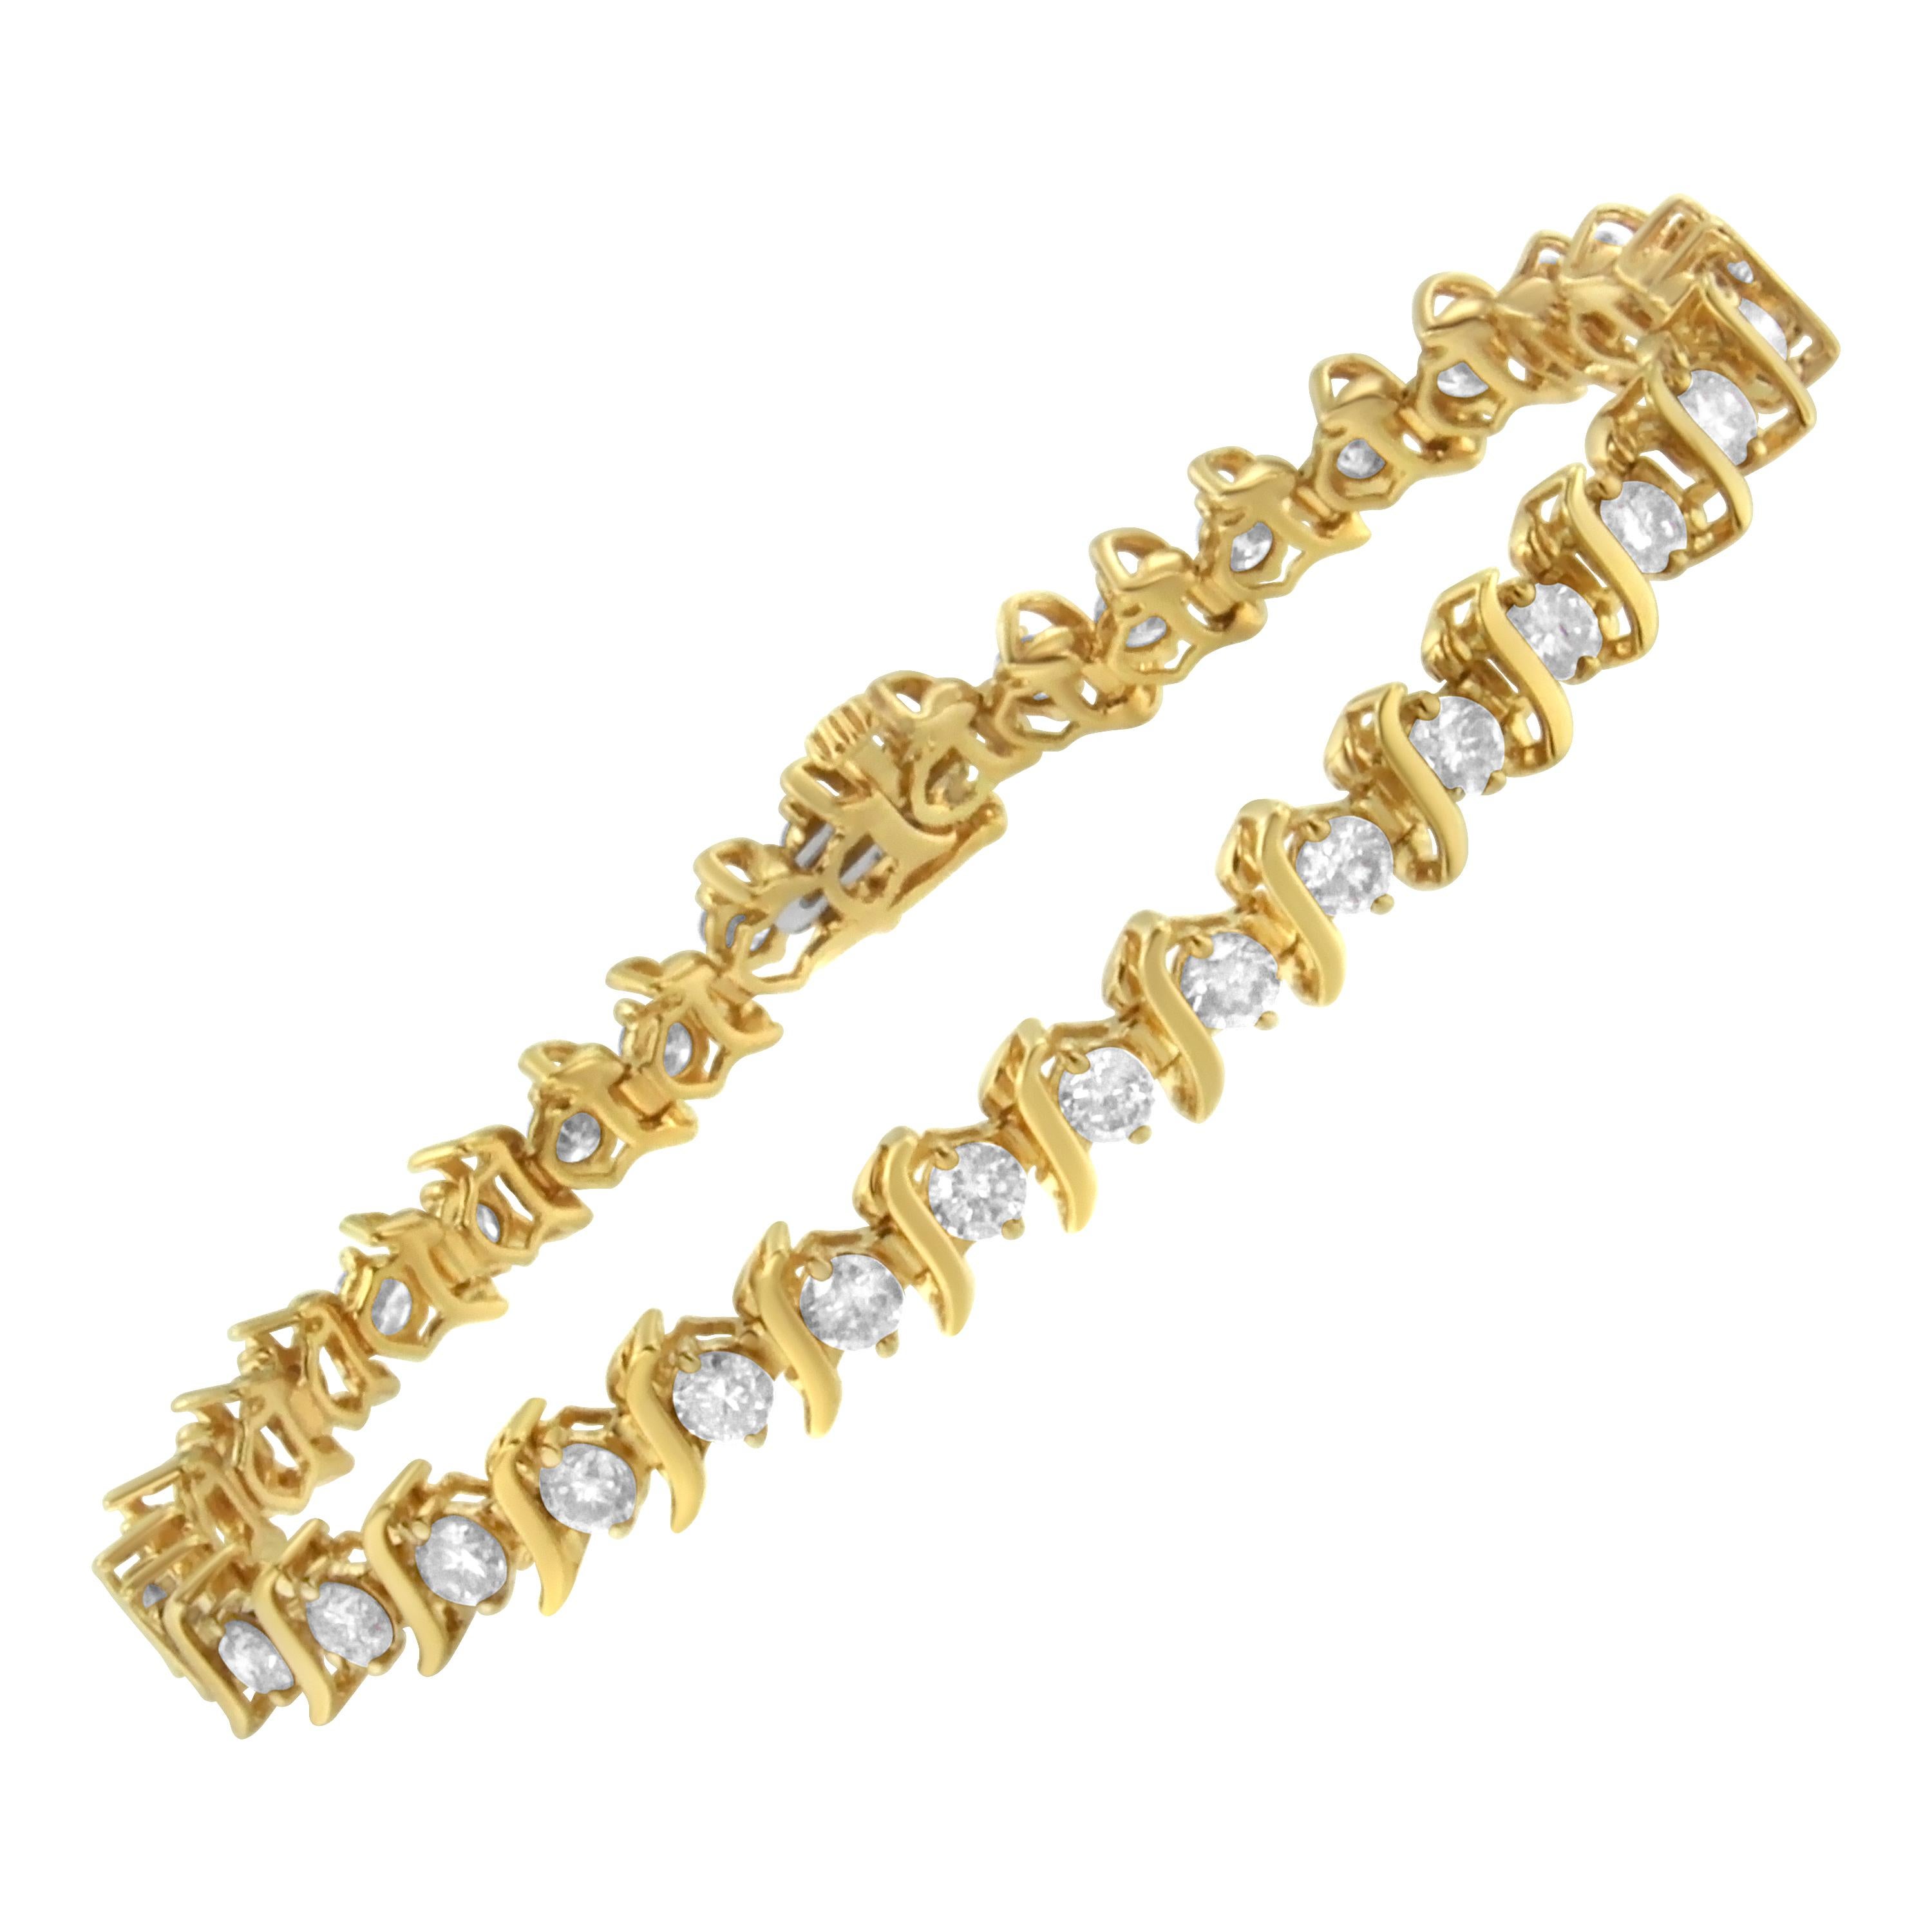 Contemporary Yellow Gold Plated Sterling Silver 5.0 Carat Diamond Link Bracelet For Sale